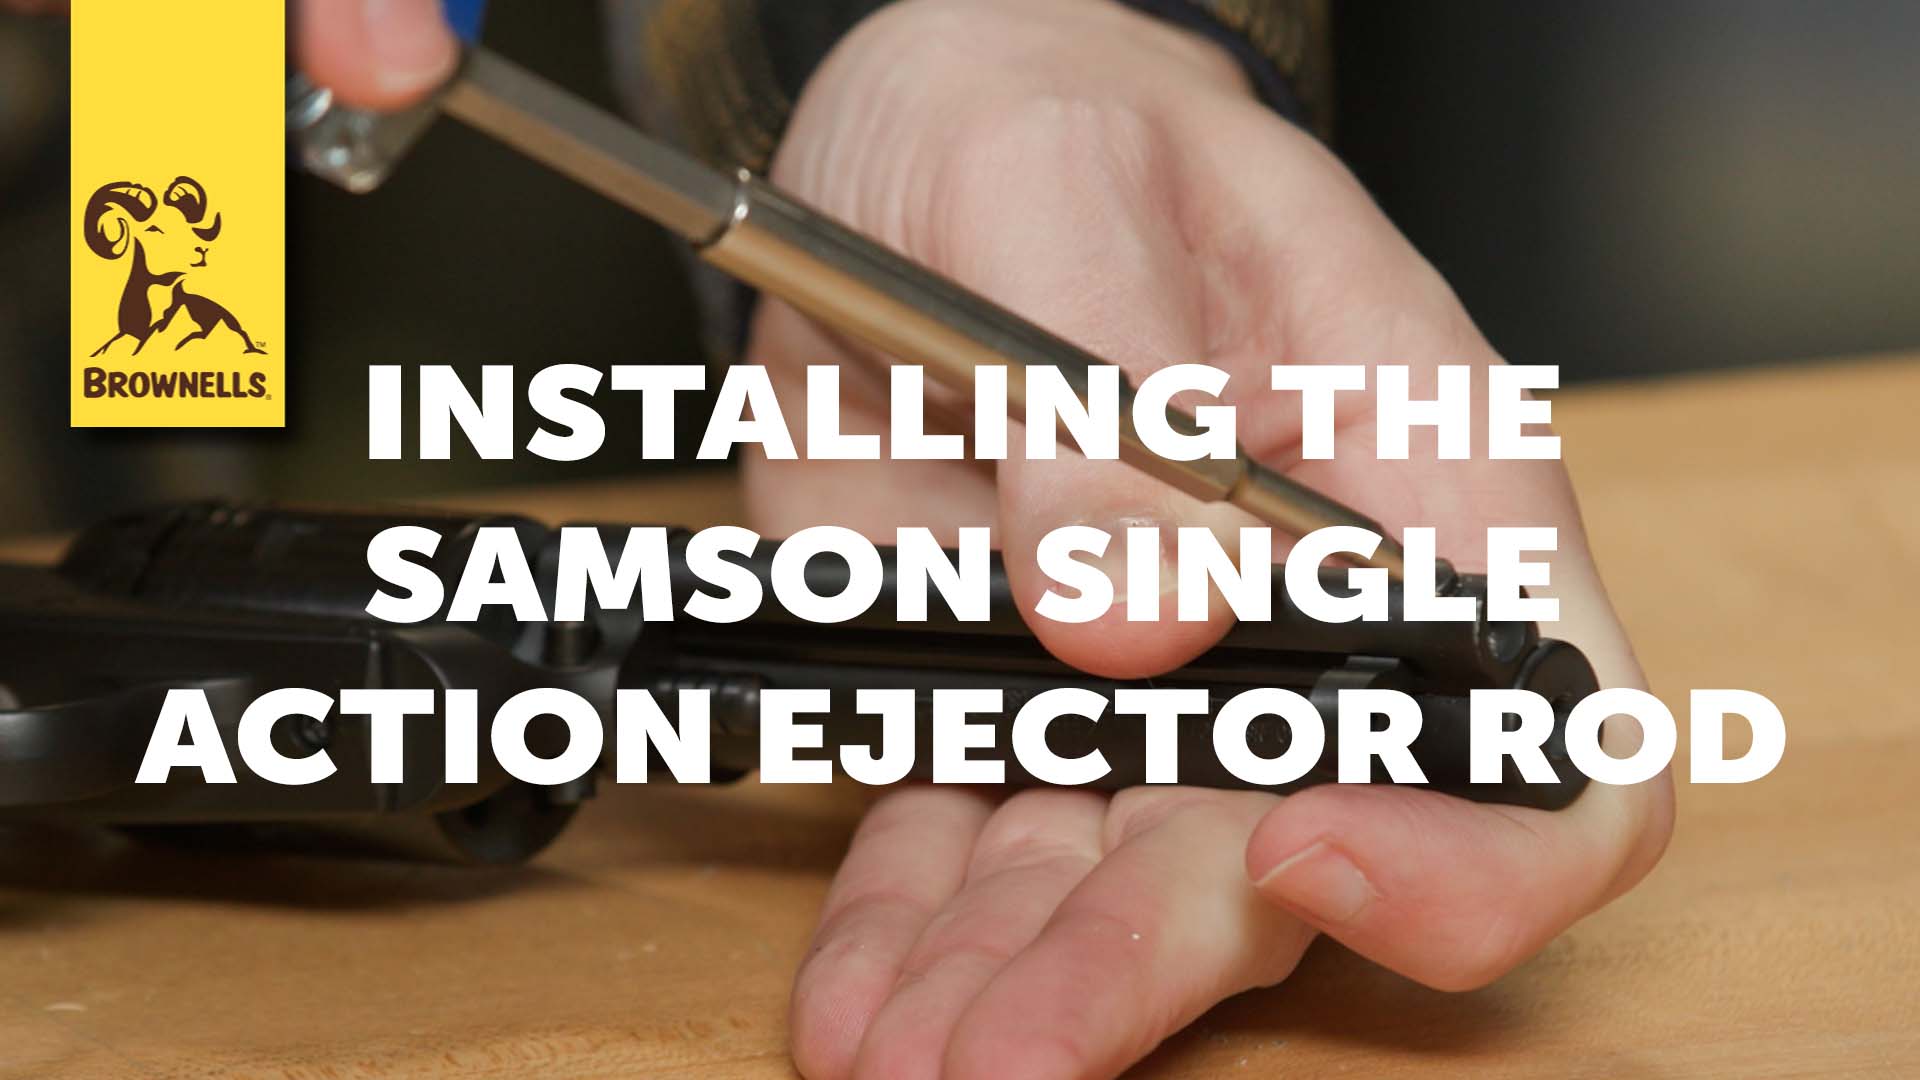 Quick Tip: The Samson Single Action Ejector Rod